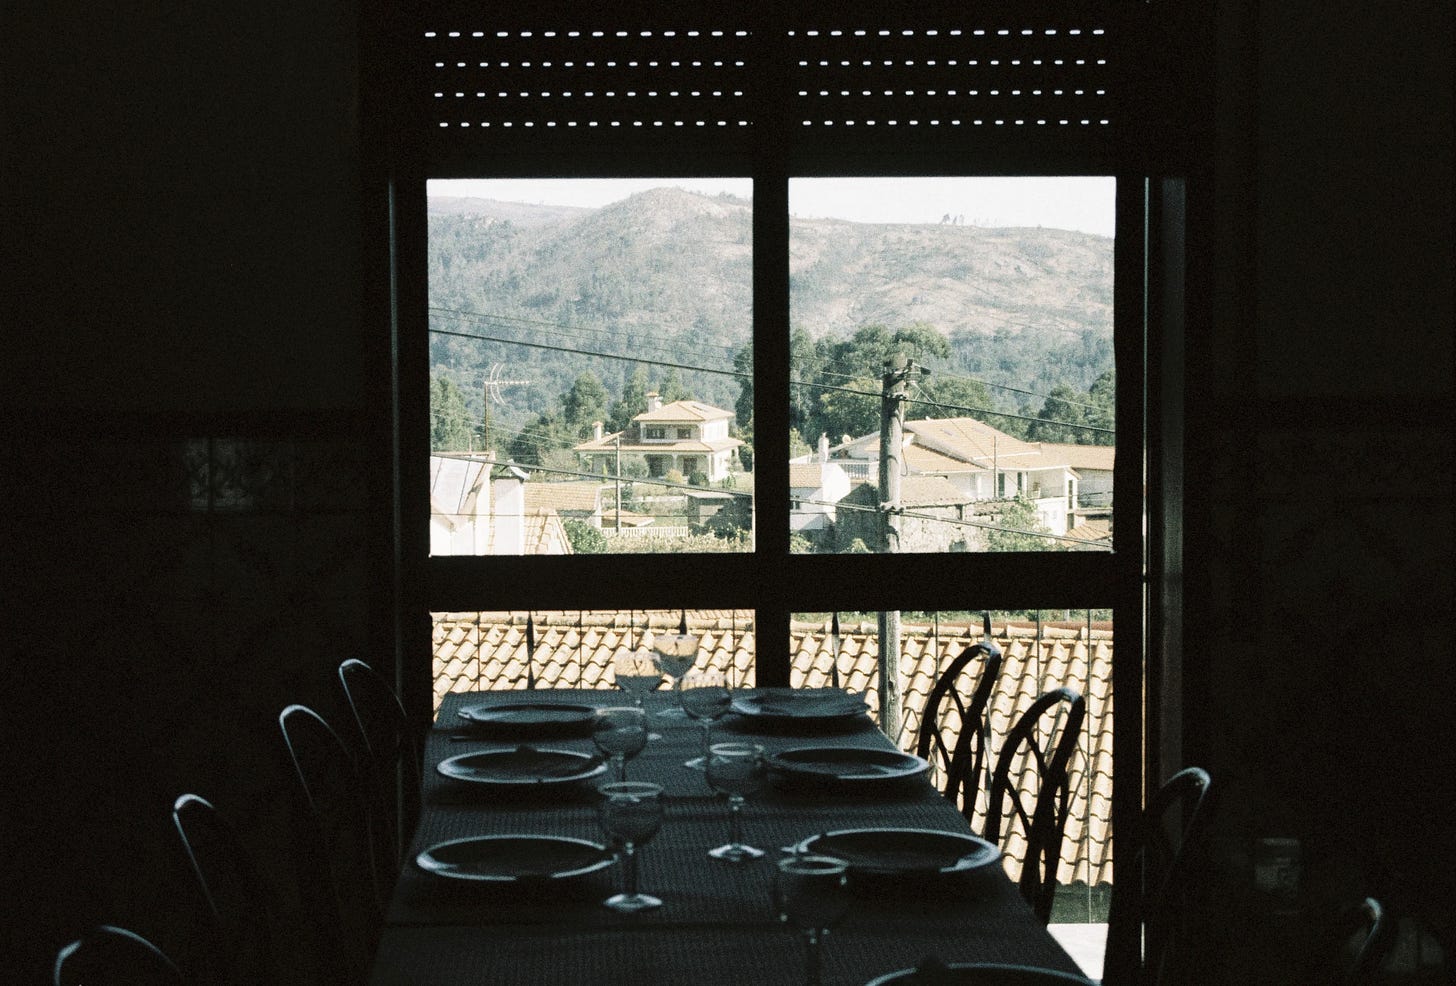 A table set with plates and glasses by a window, overlooking the valley in the cozinha.